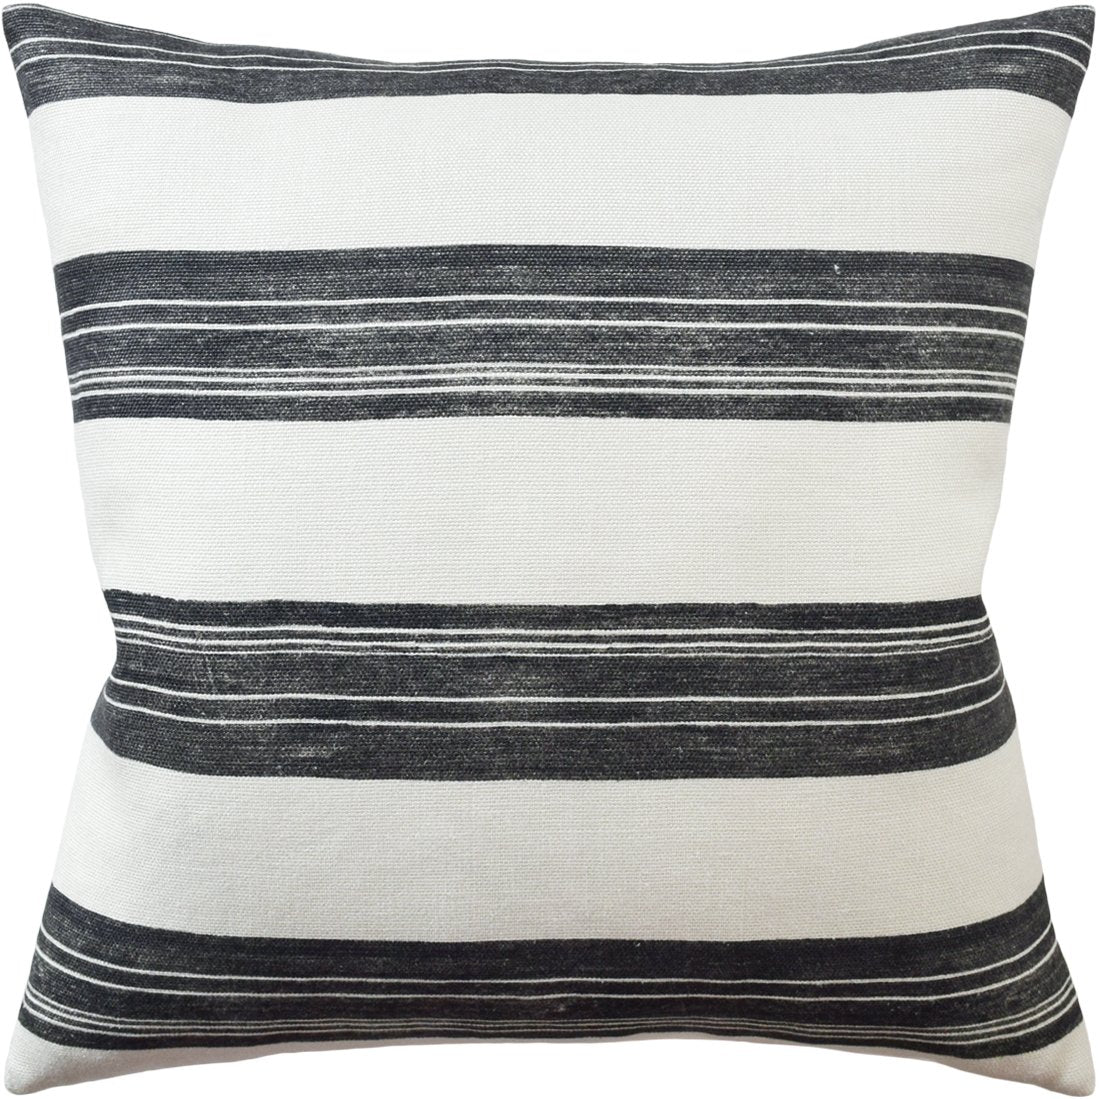 Askew Pillow - Ivory and Onyx